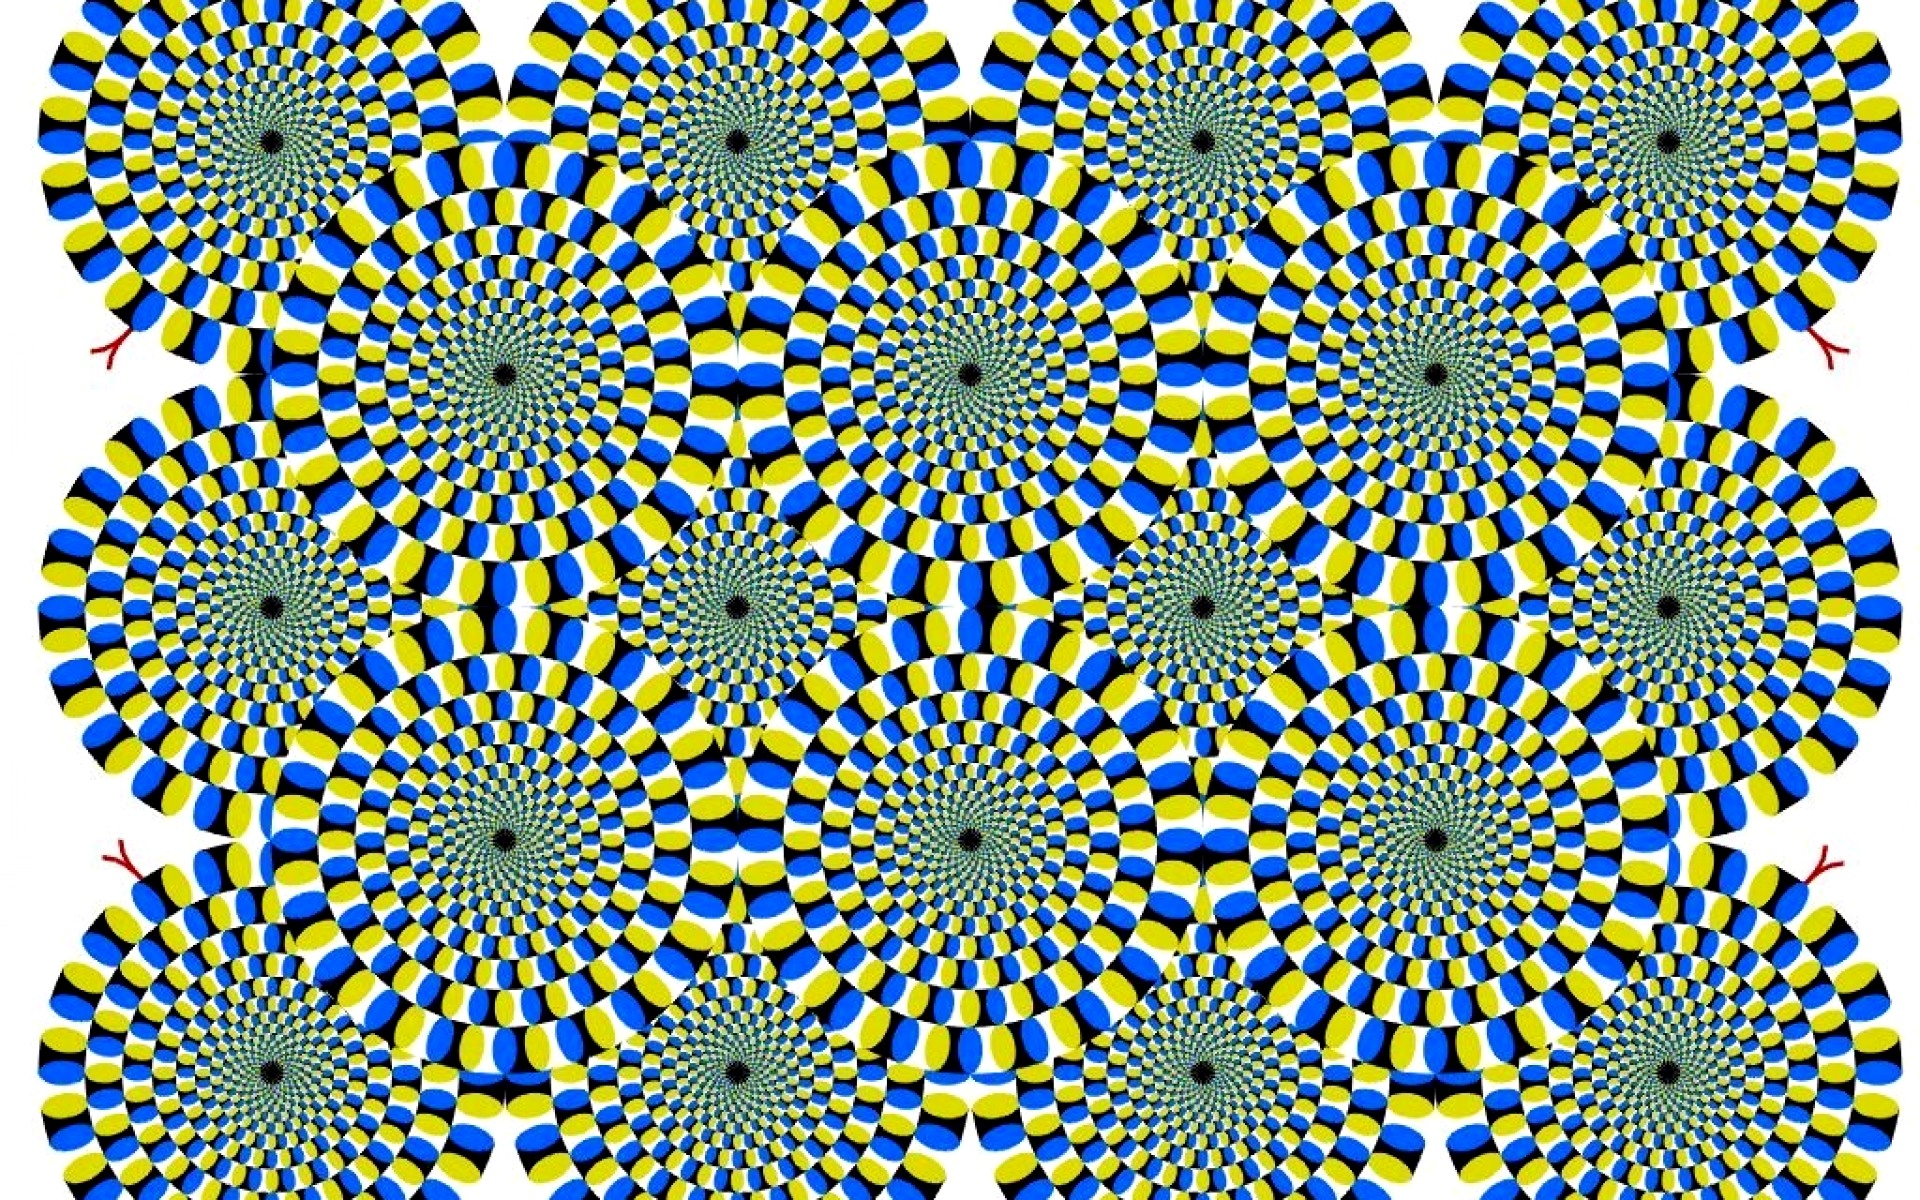 Moving Circles Cool Optical Illusion Widescreen And Full HD